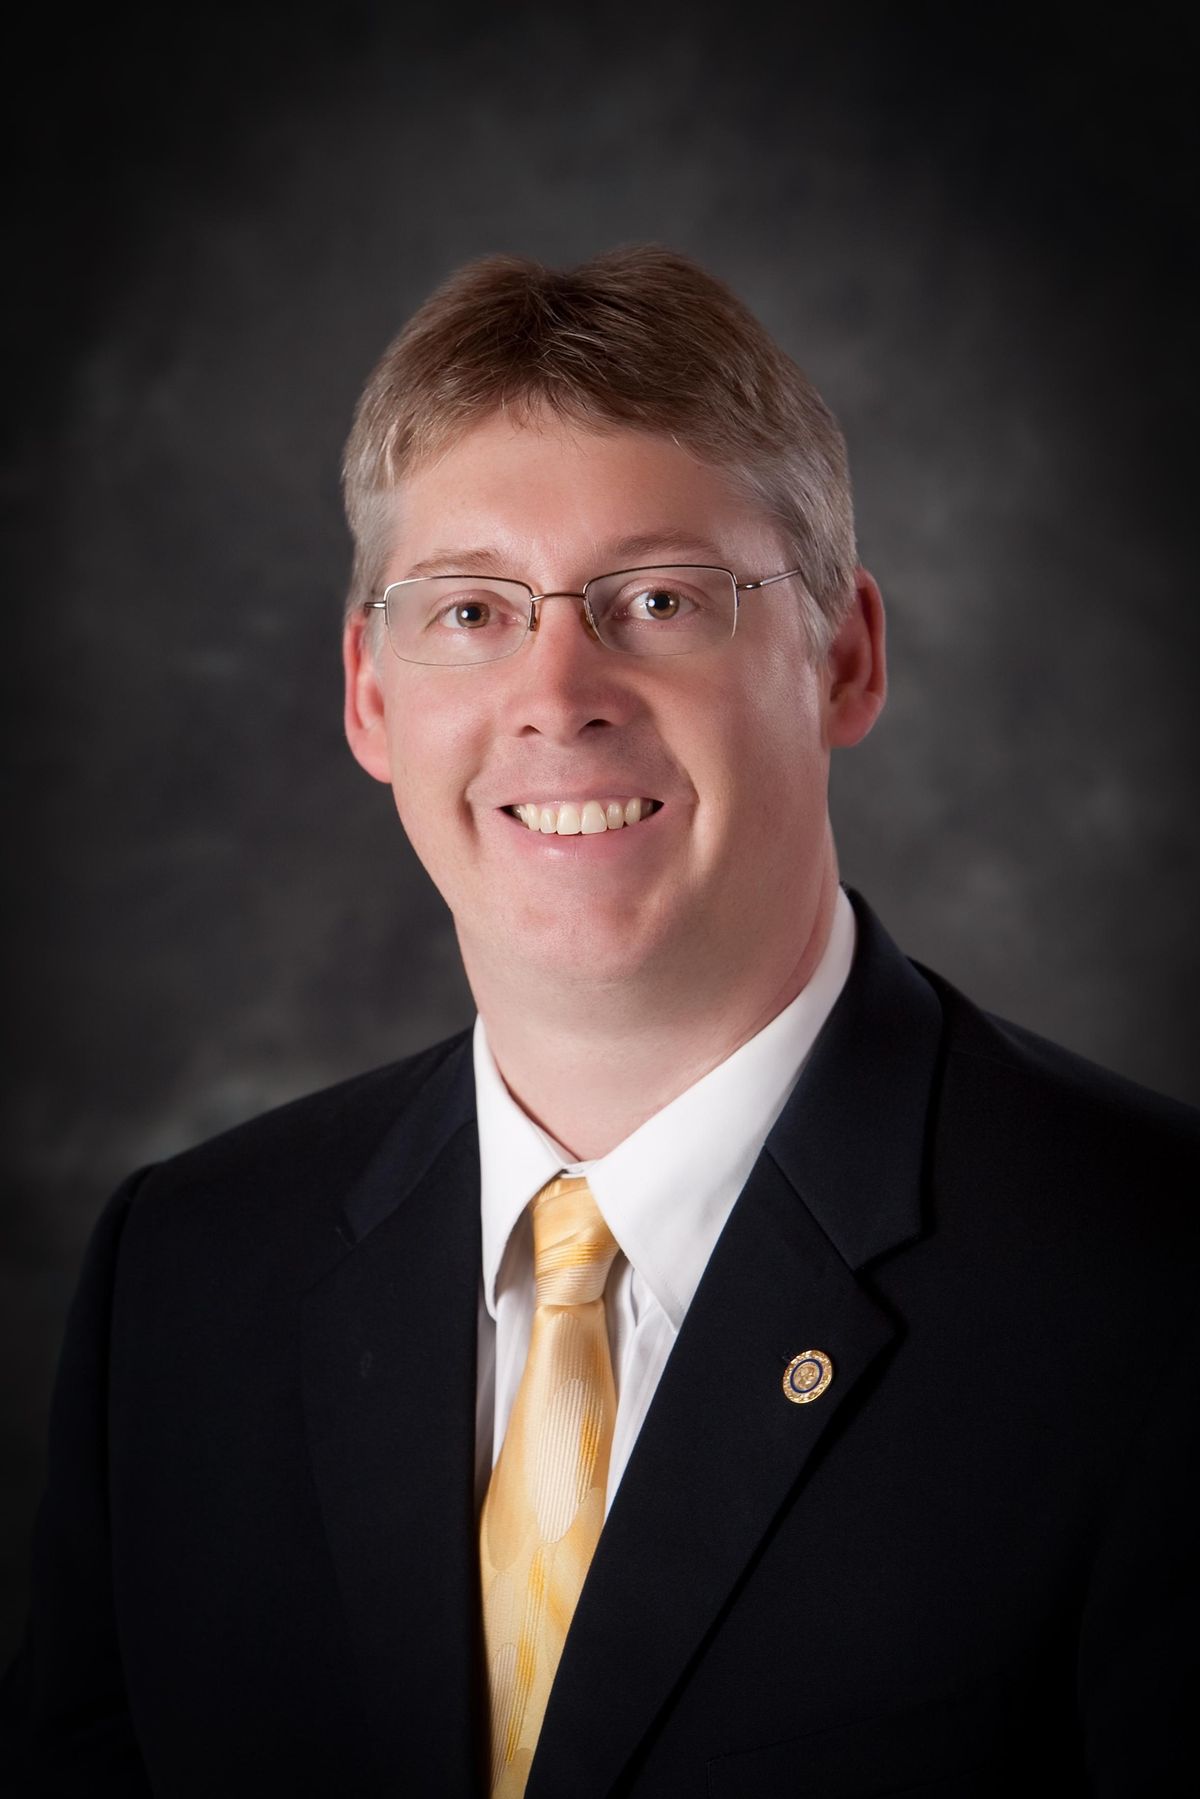 Darren Pitcher has been named acting president of Spokane Falls Community College. (Courtesy of Community Colleges of Spokane)